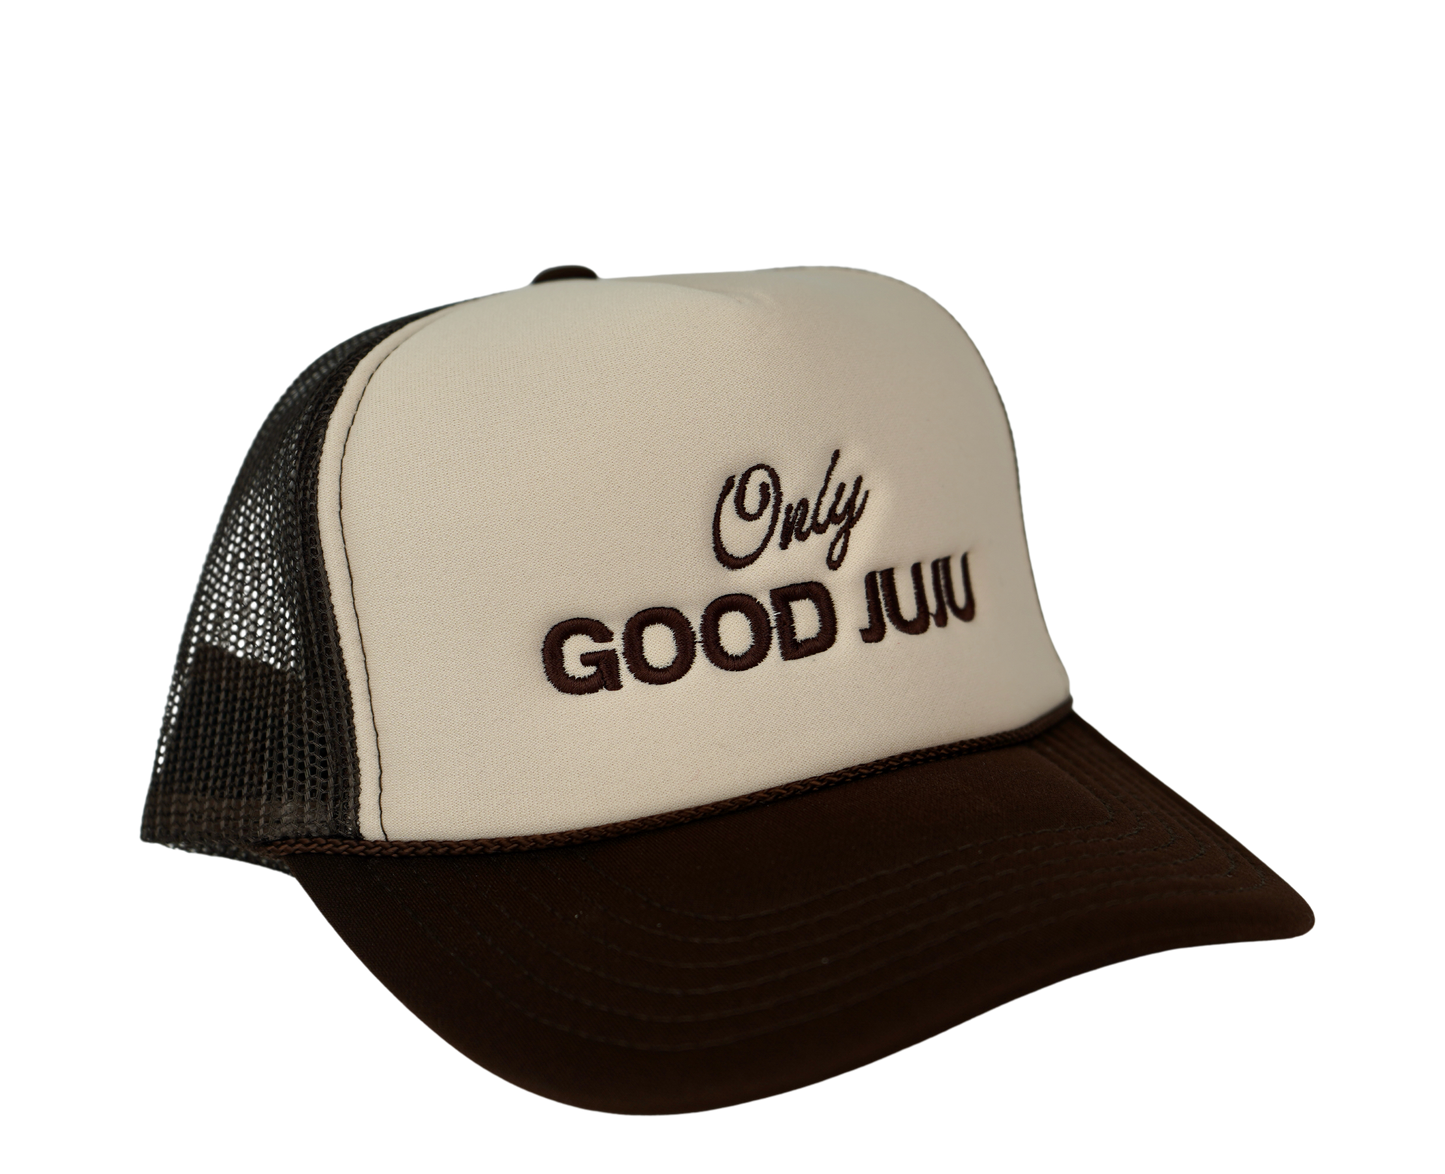 Only Good JuJu Embroidered Trucker Hat - Brown/Tan